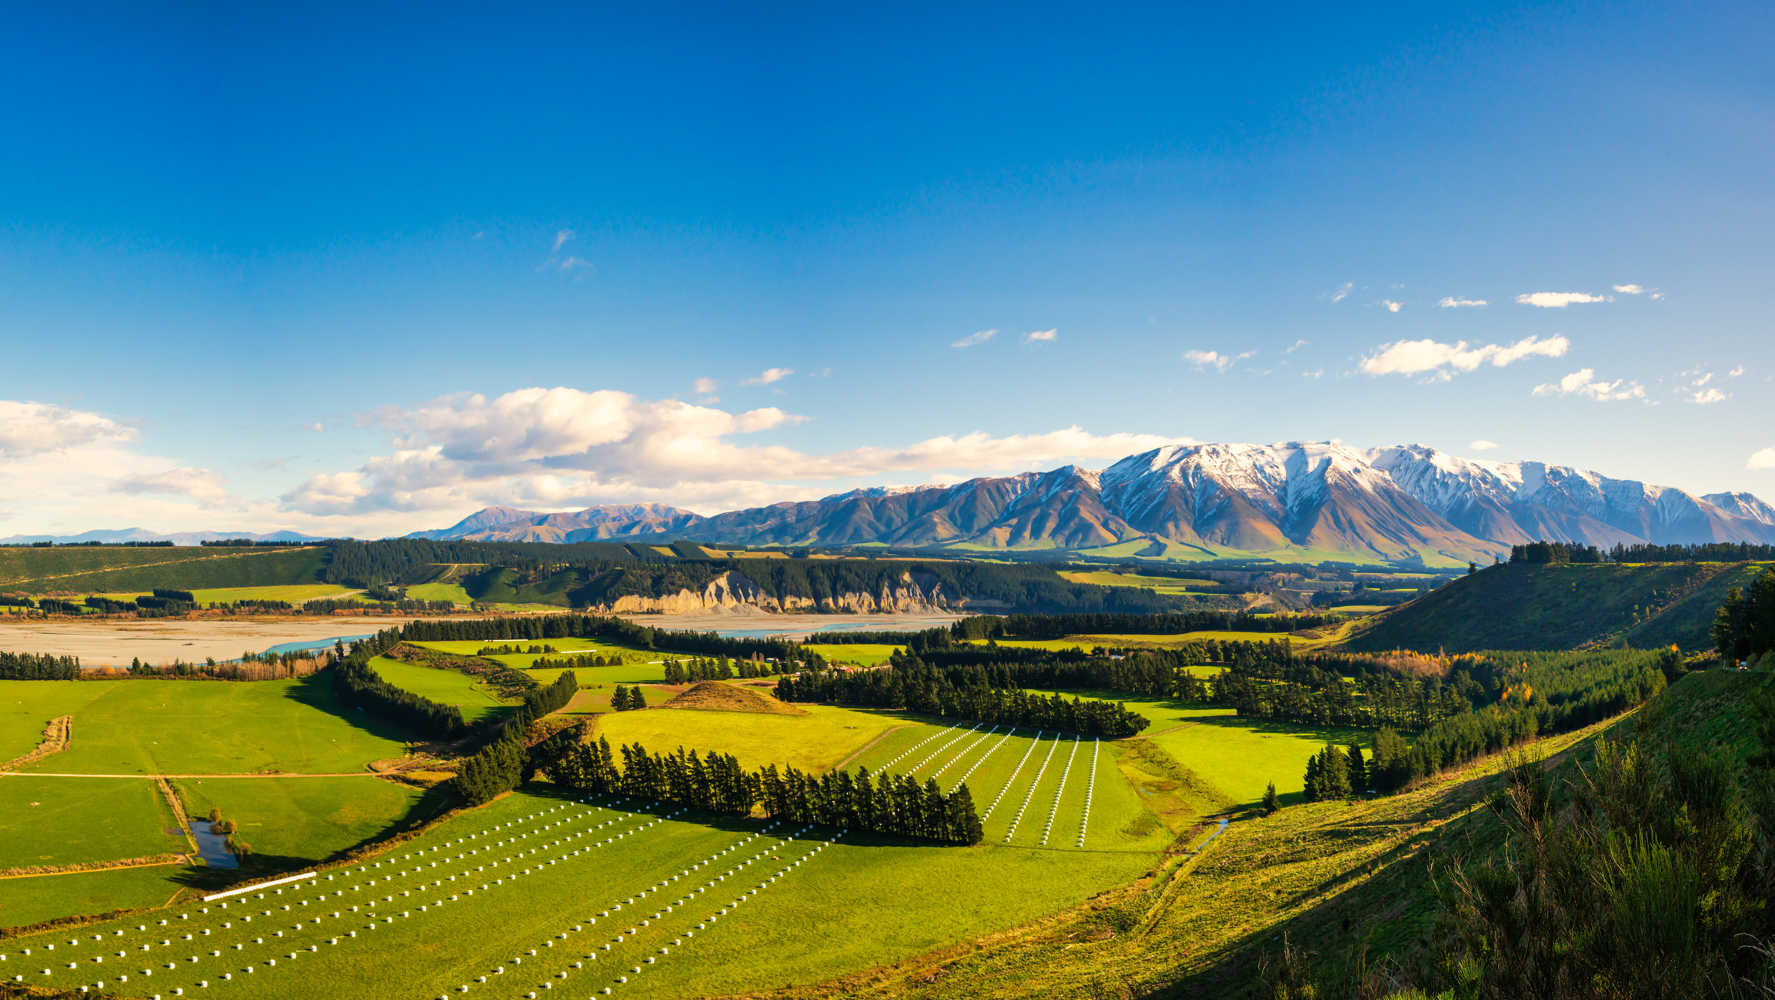 Near the village of Windwhistle looking over agricultural farming fields and the Rakaia Gorge towards Mt Hutt with a slight dusting of snow on the mountain peak, New Zealand